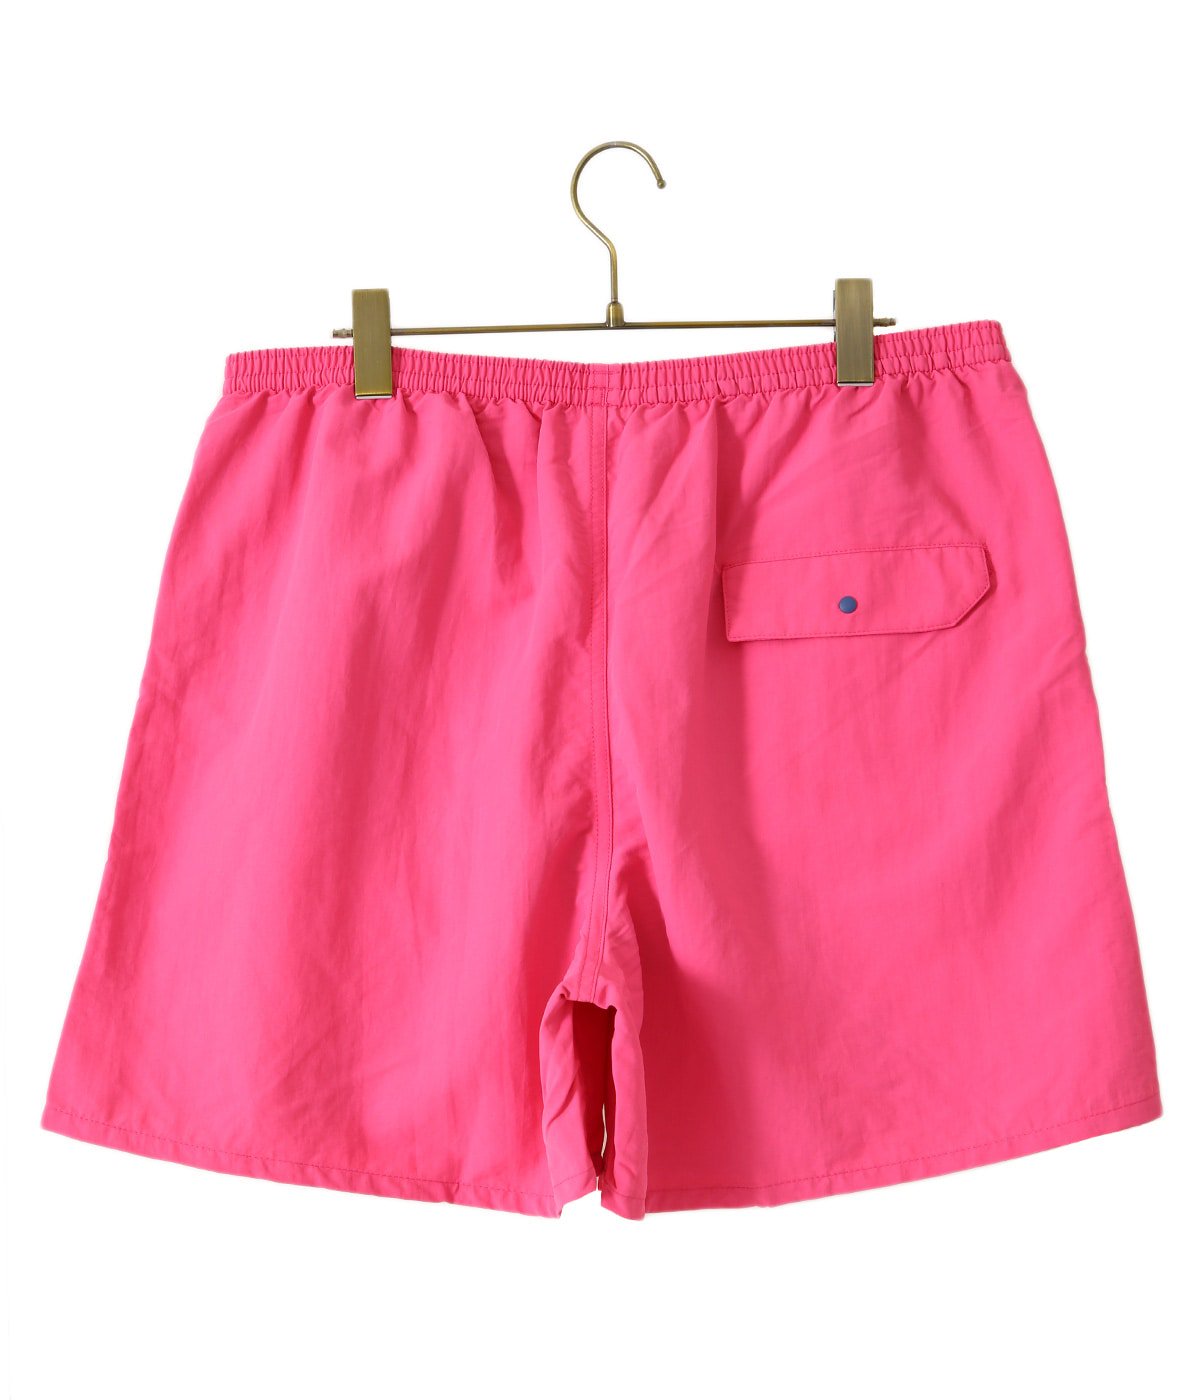 M’s Baggies Shorts - 5 -JELY-